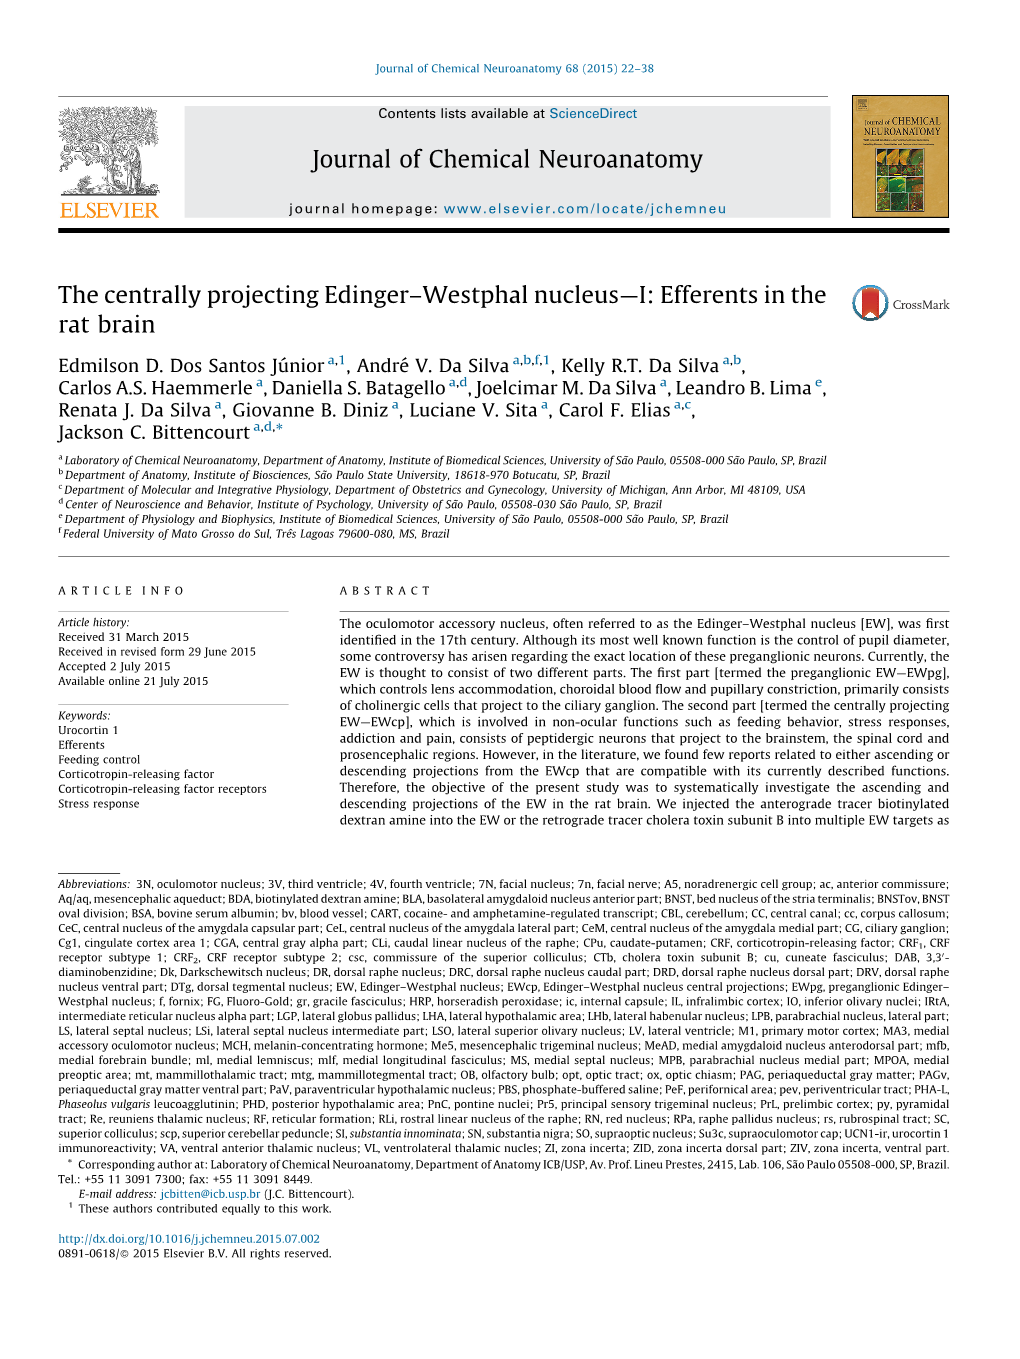 The Centrally Projecting Edinger–Westphal Nucleus—I: Efferents in the Rat Brain